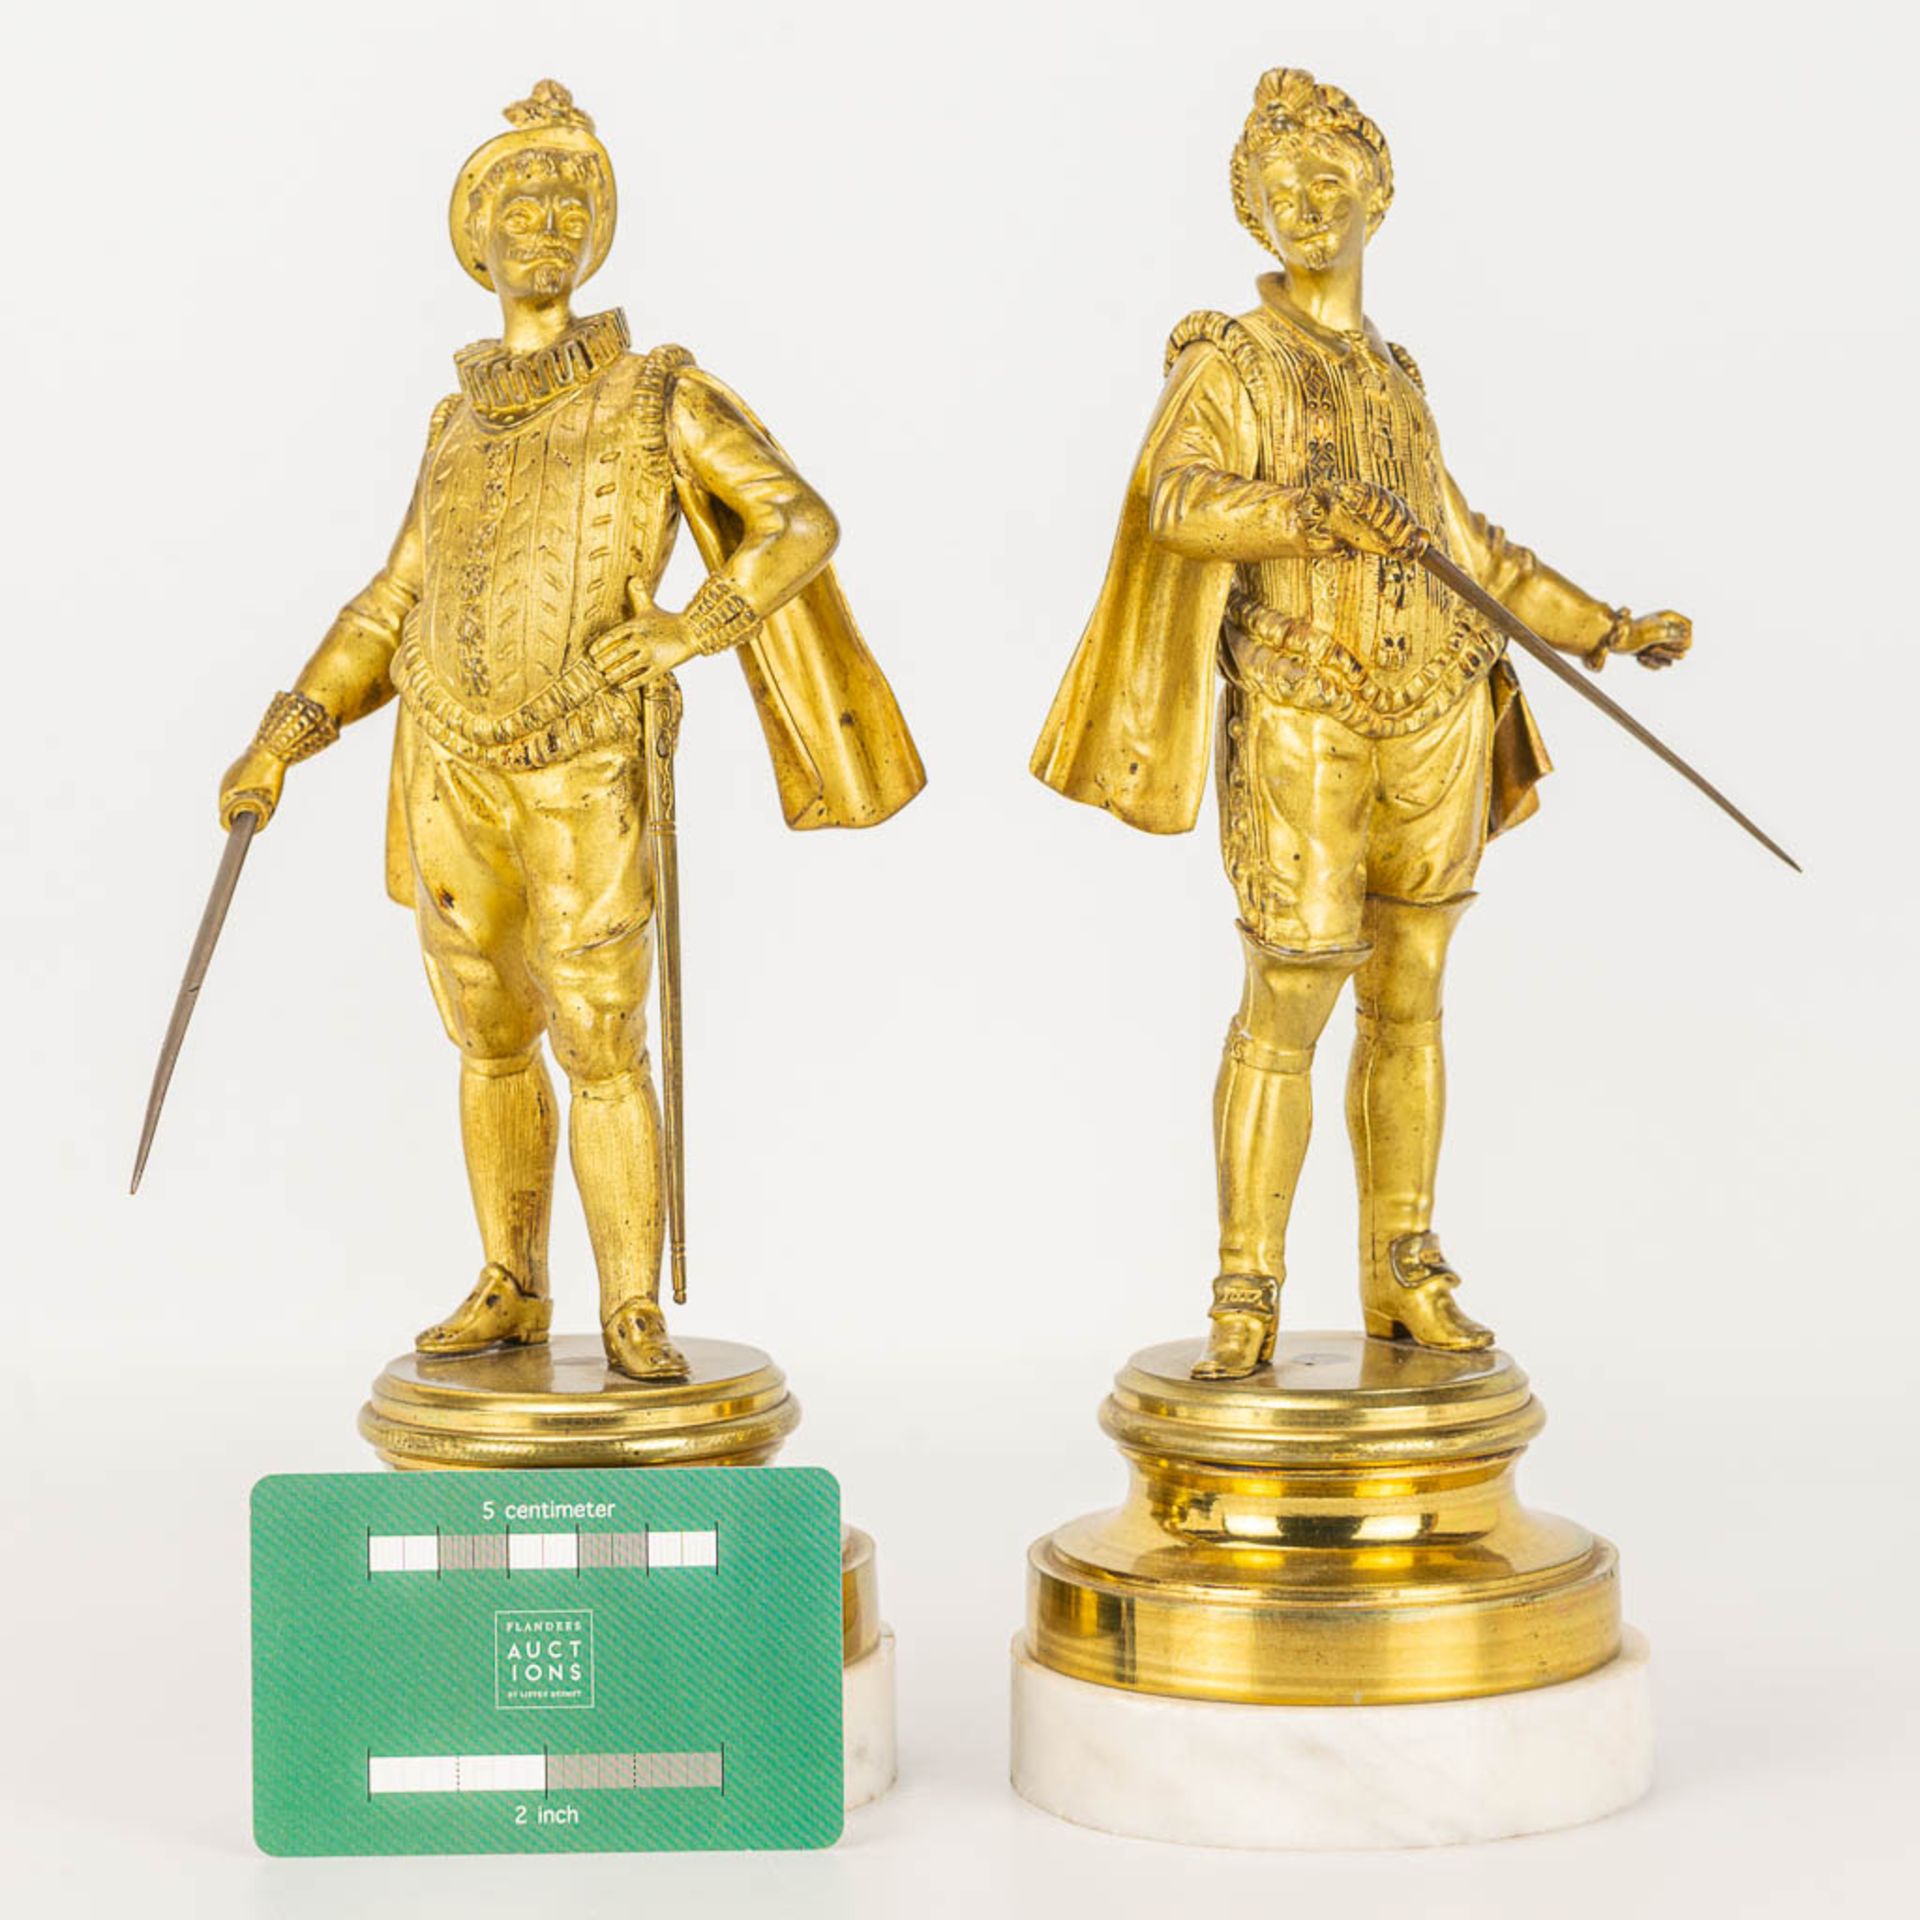 A pair of gilt Conquistadores statues made of gilt bronze and standing on a white marble base. - Image 6 of 9